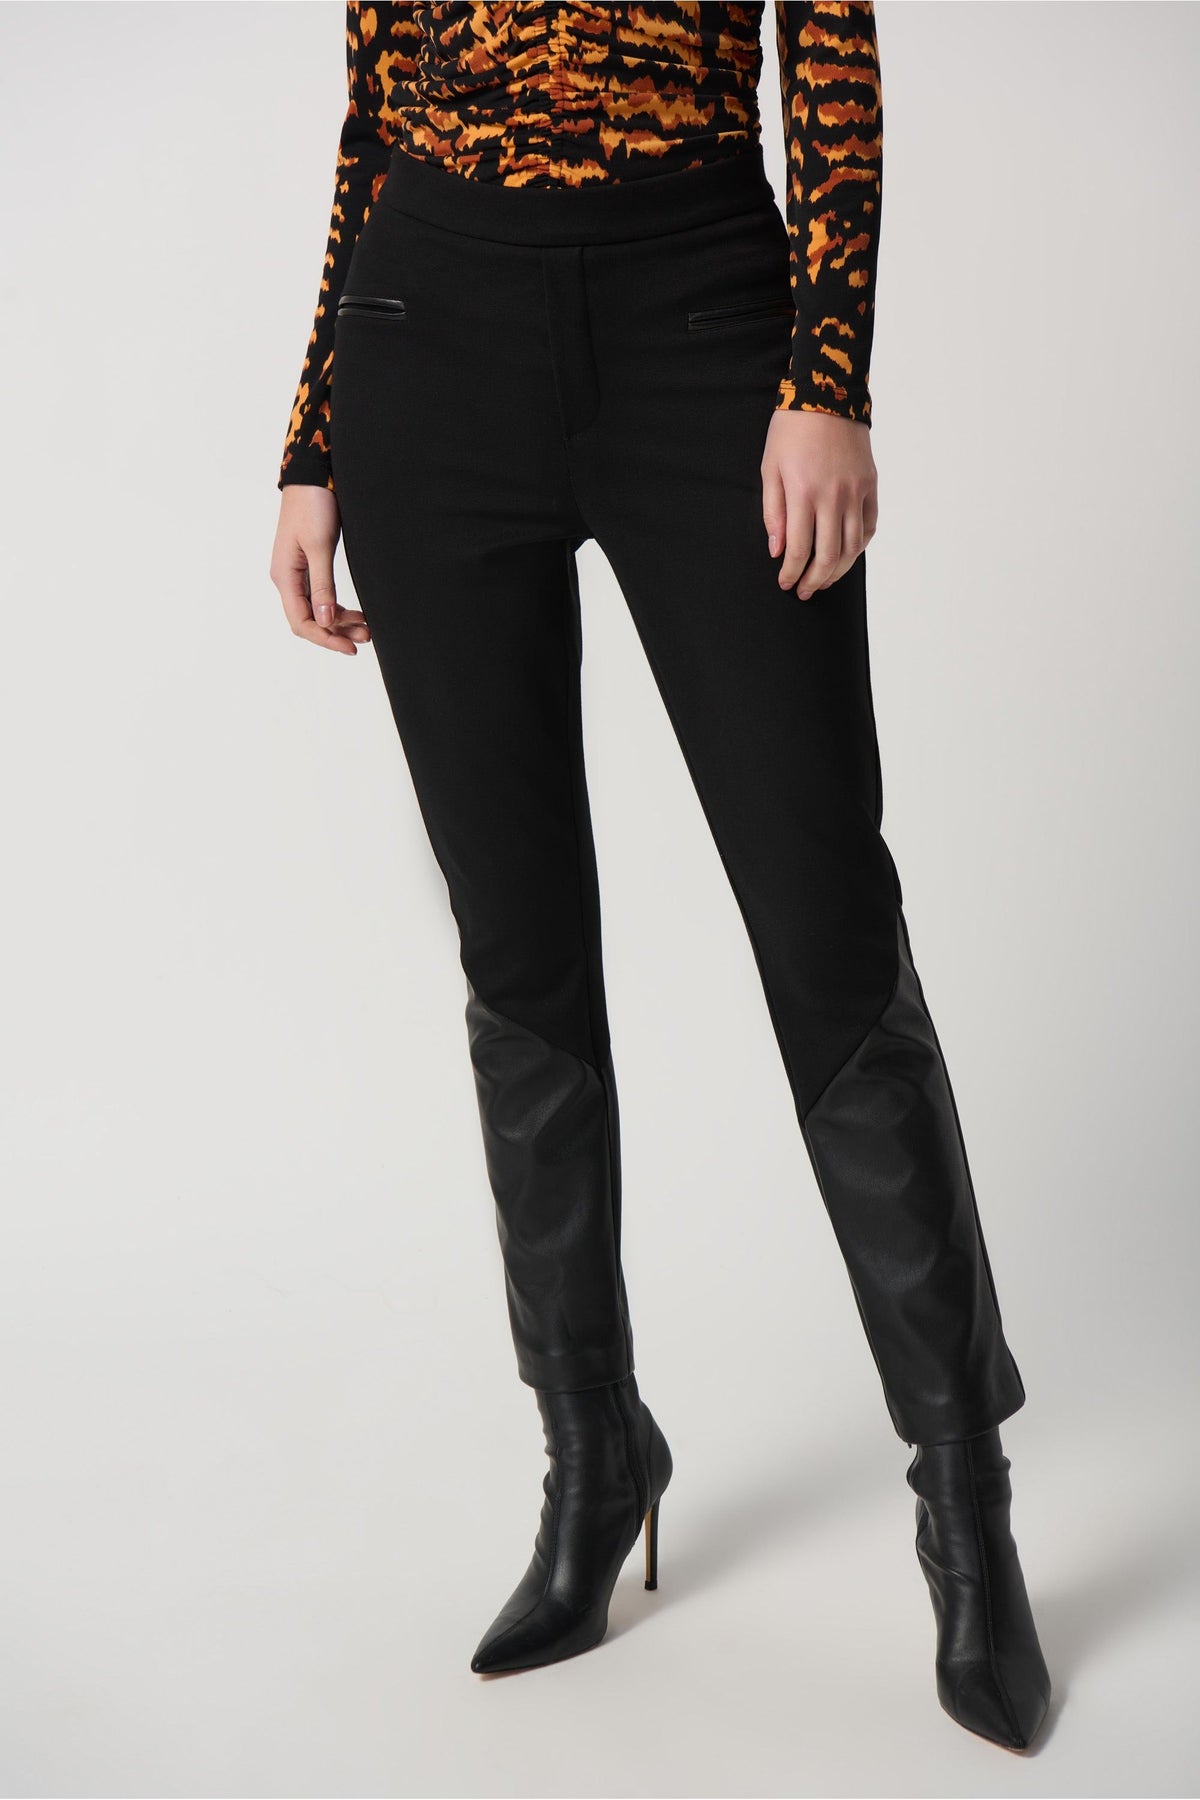 Joseph Ribkoff Heavy Knit And Faux Leather Pants - Style 234036, front